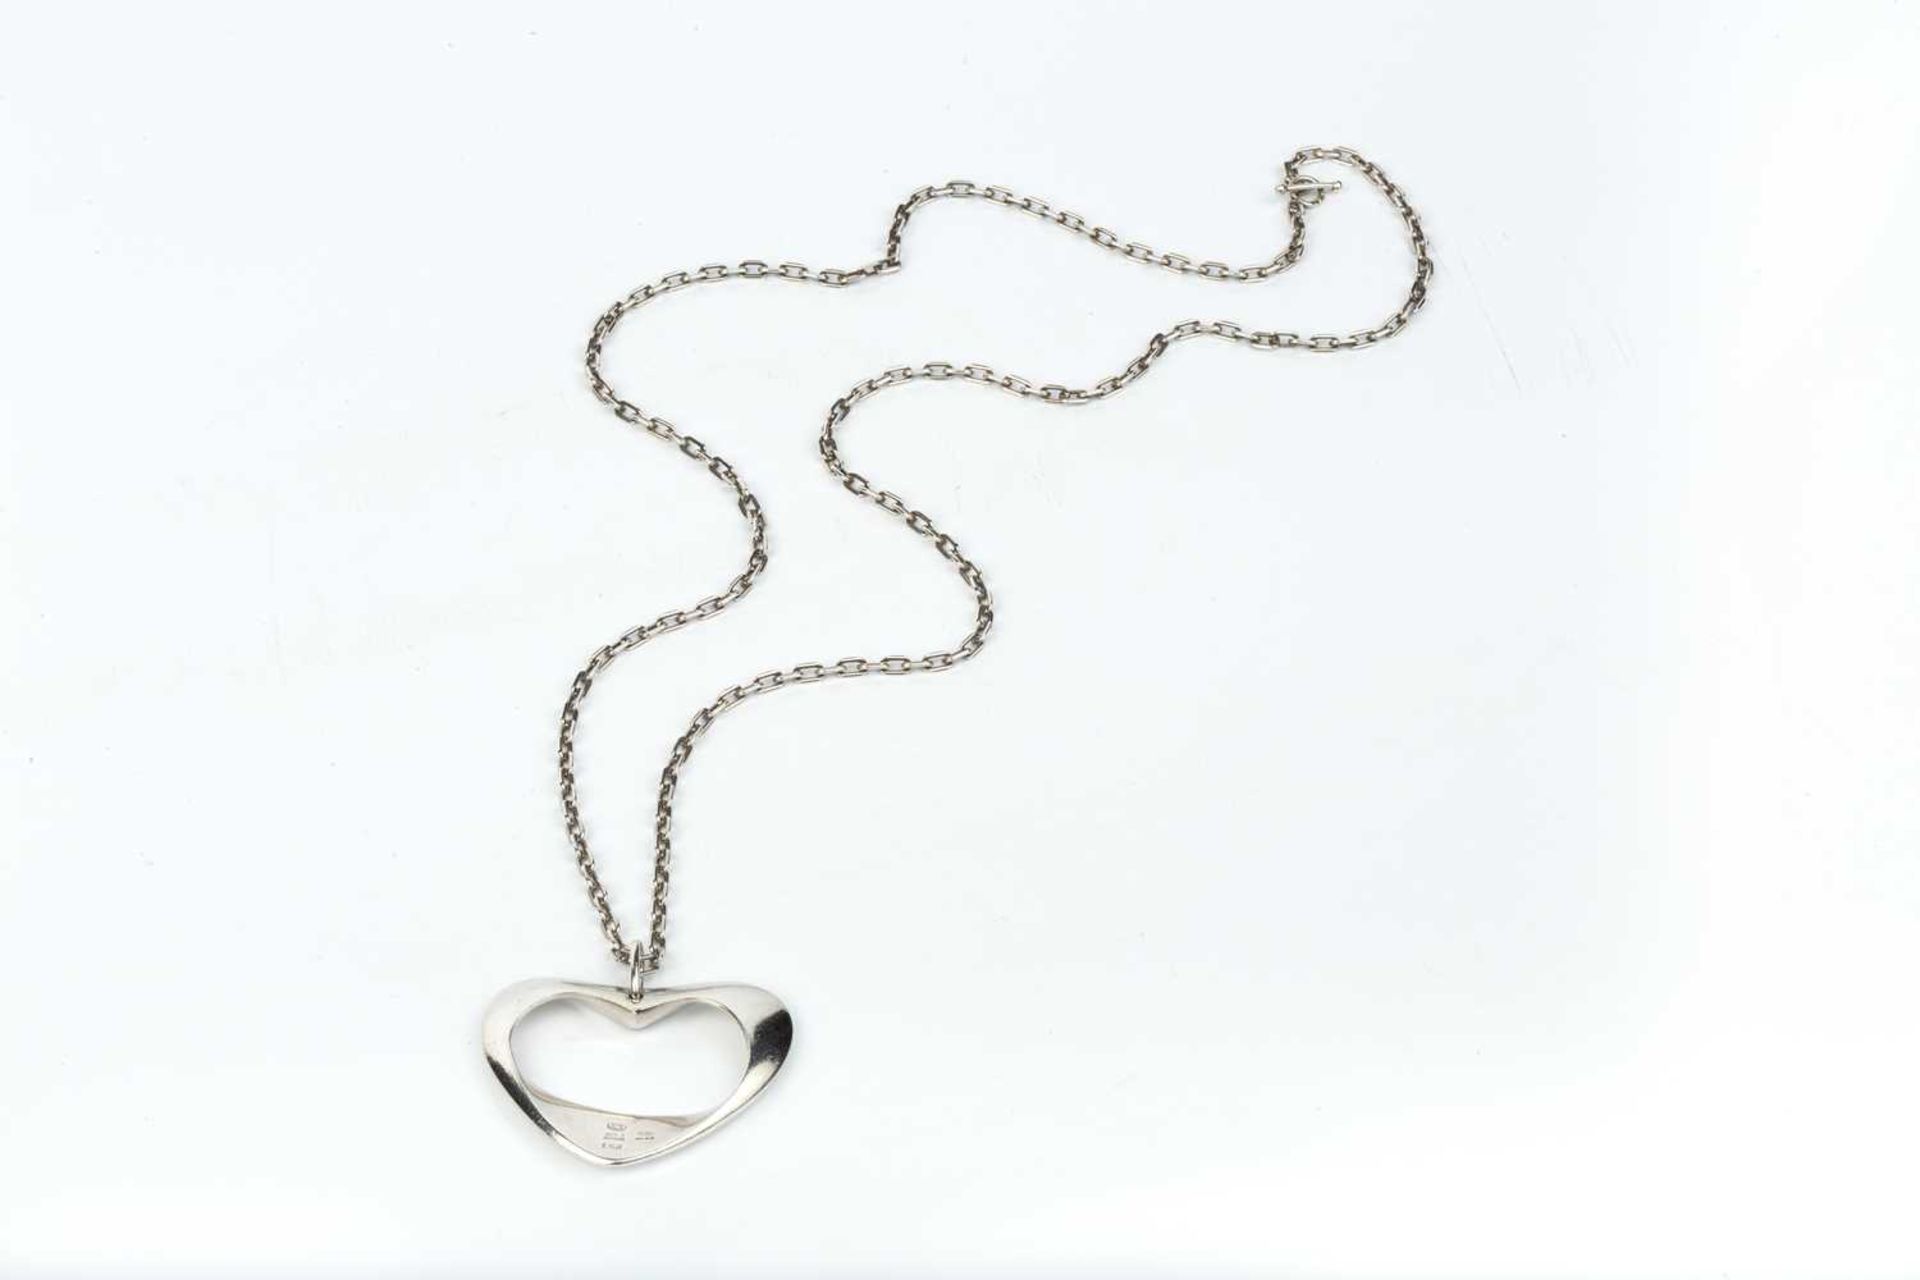 Henning Koppel for Georg Jensen Silver heart pendant on chain signed and stamped '925S DENMARK' - Image 2 of 4